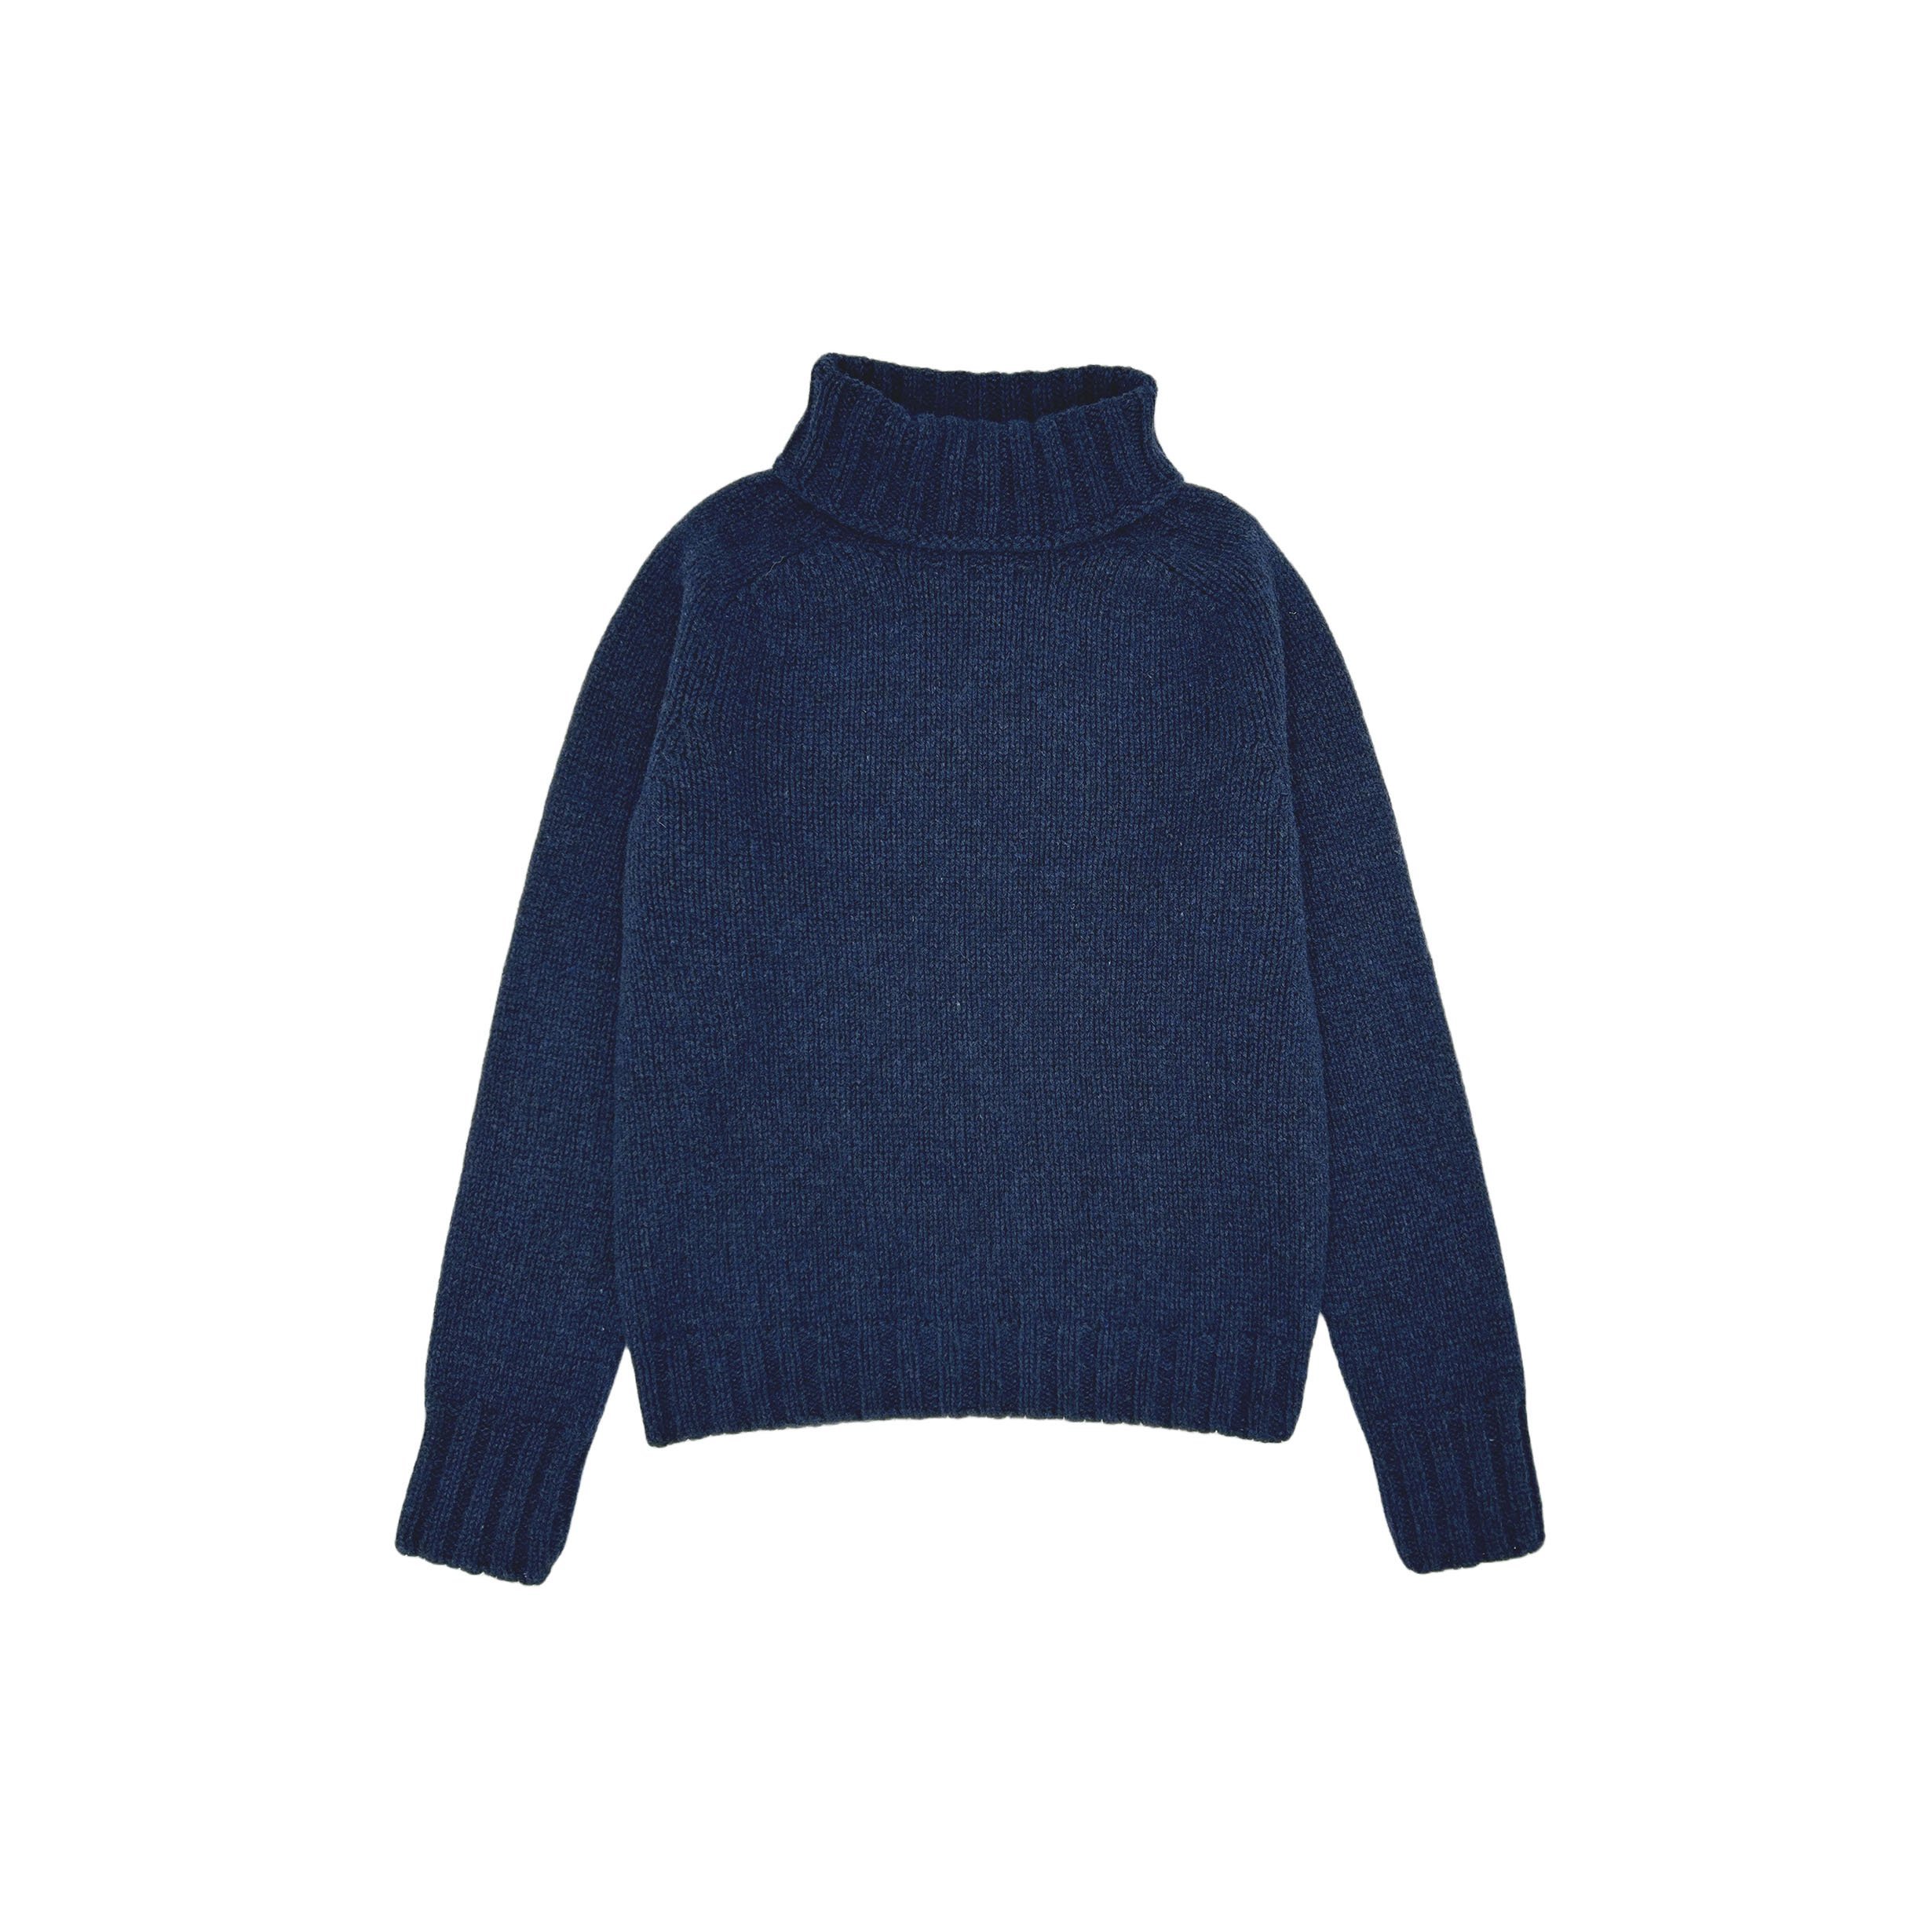 An image of Womens 'Big Softy' Geelong Polo Neck Jumper - 6 Colours - Small/Cosmos Navy